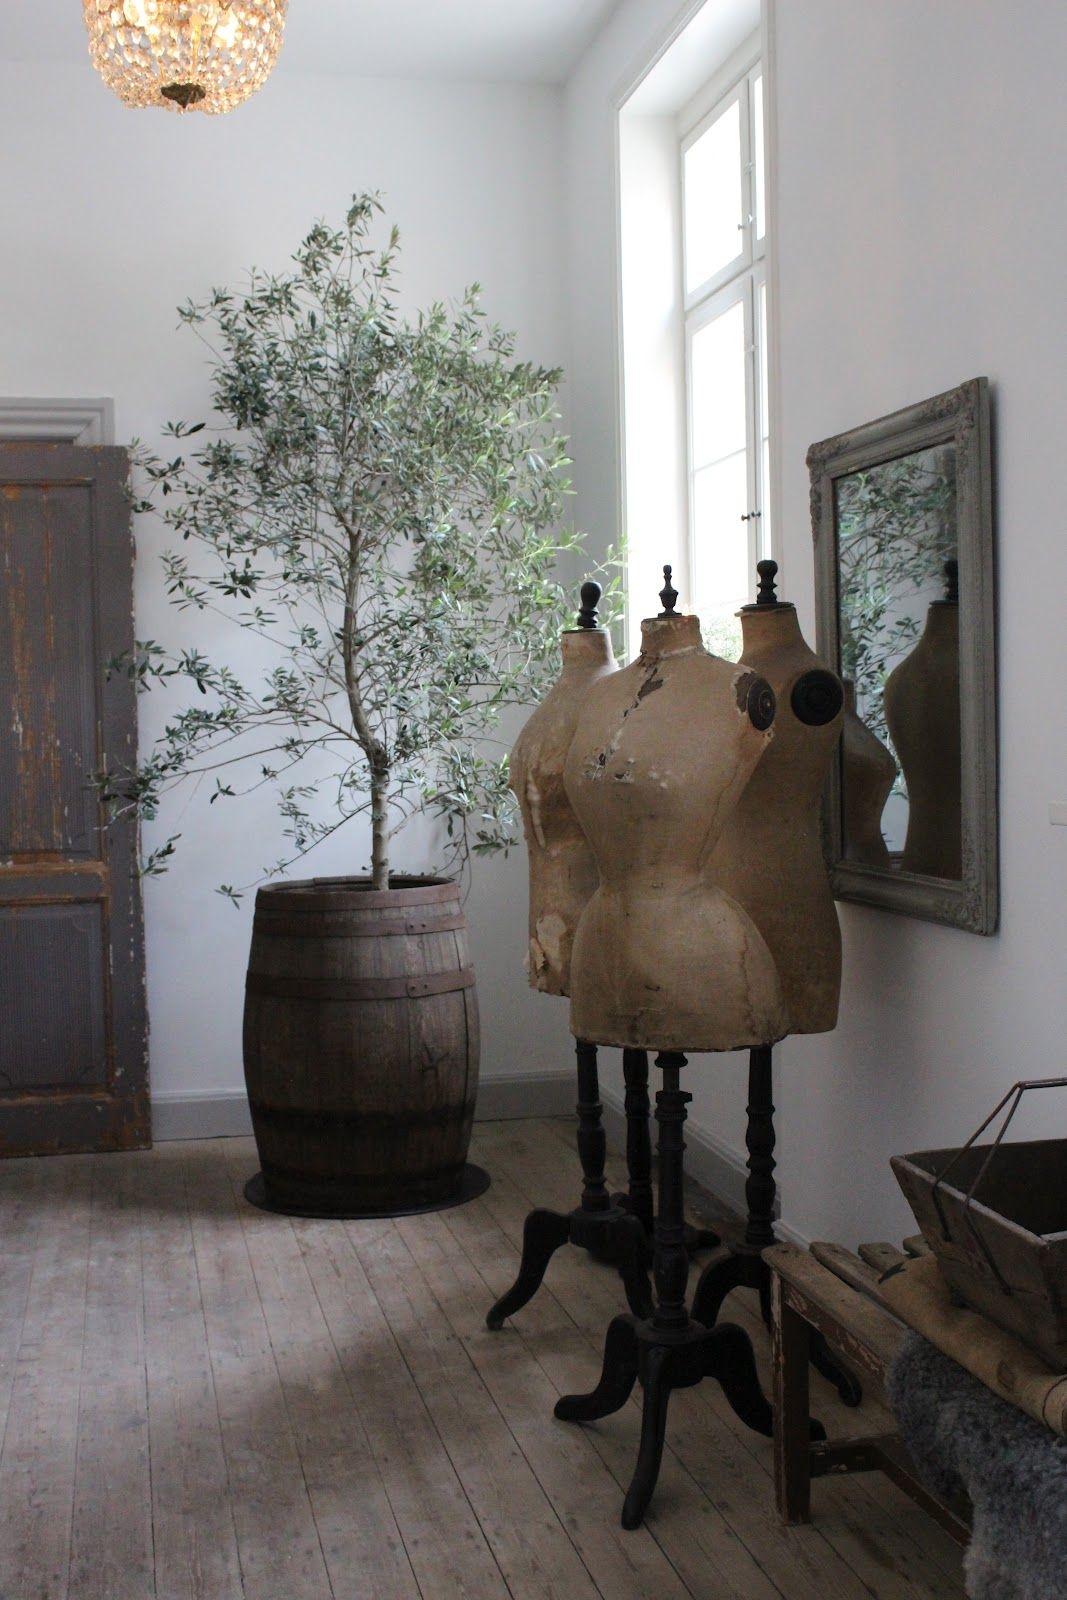 Mannequins and the large tree in the whiskey barrel